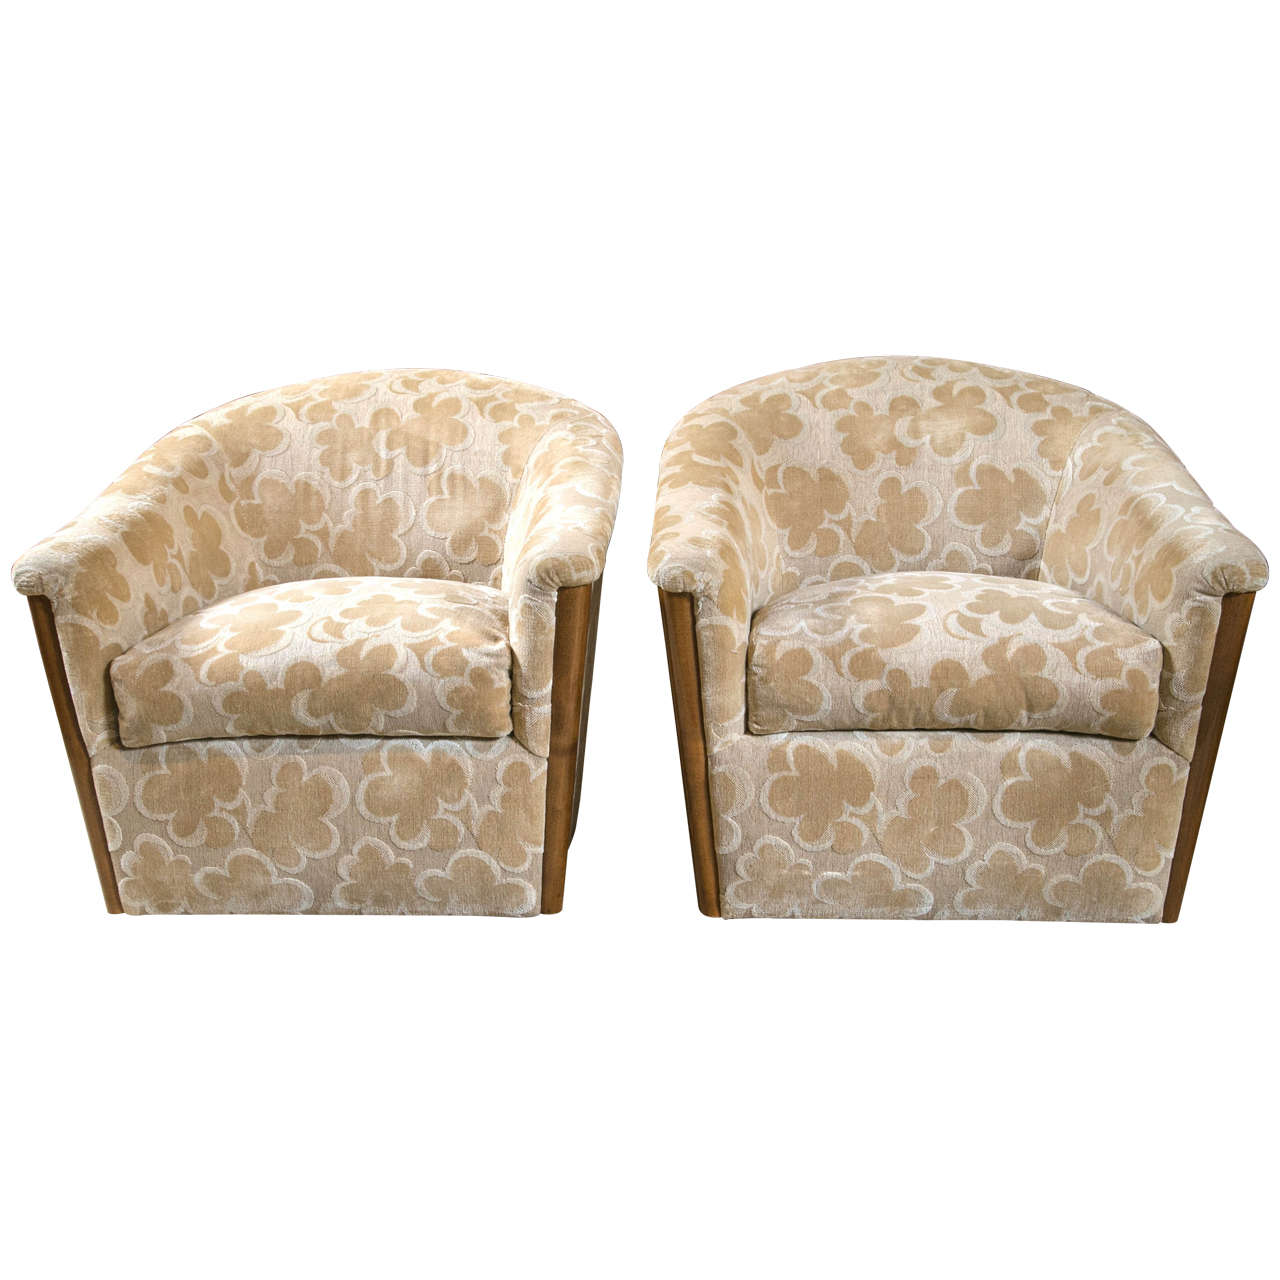 Pair of Swivel Lounge Chairs by Sally Sirkin Lewis for J. Robert Scott